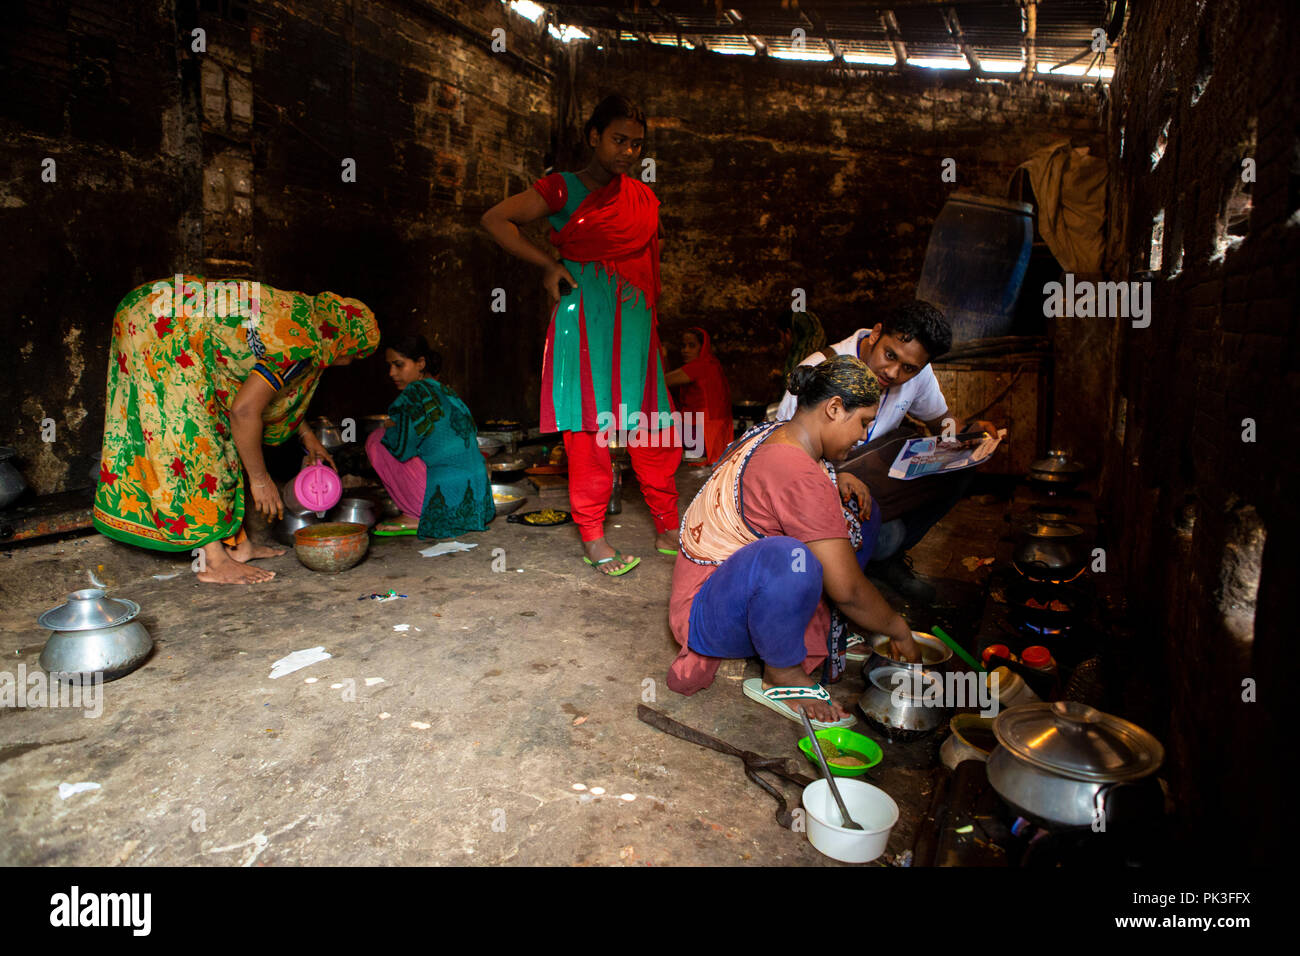 A man talking to a woman about the working conditions of her garment factory as she cooks in a communal kitchen in the slums of Dhaka, Bangladesh. Stock Photo